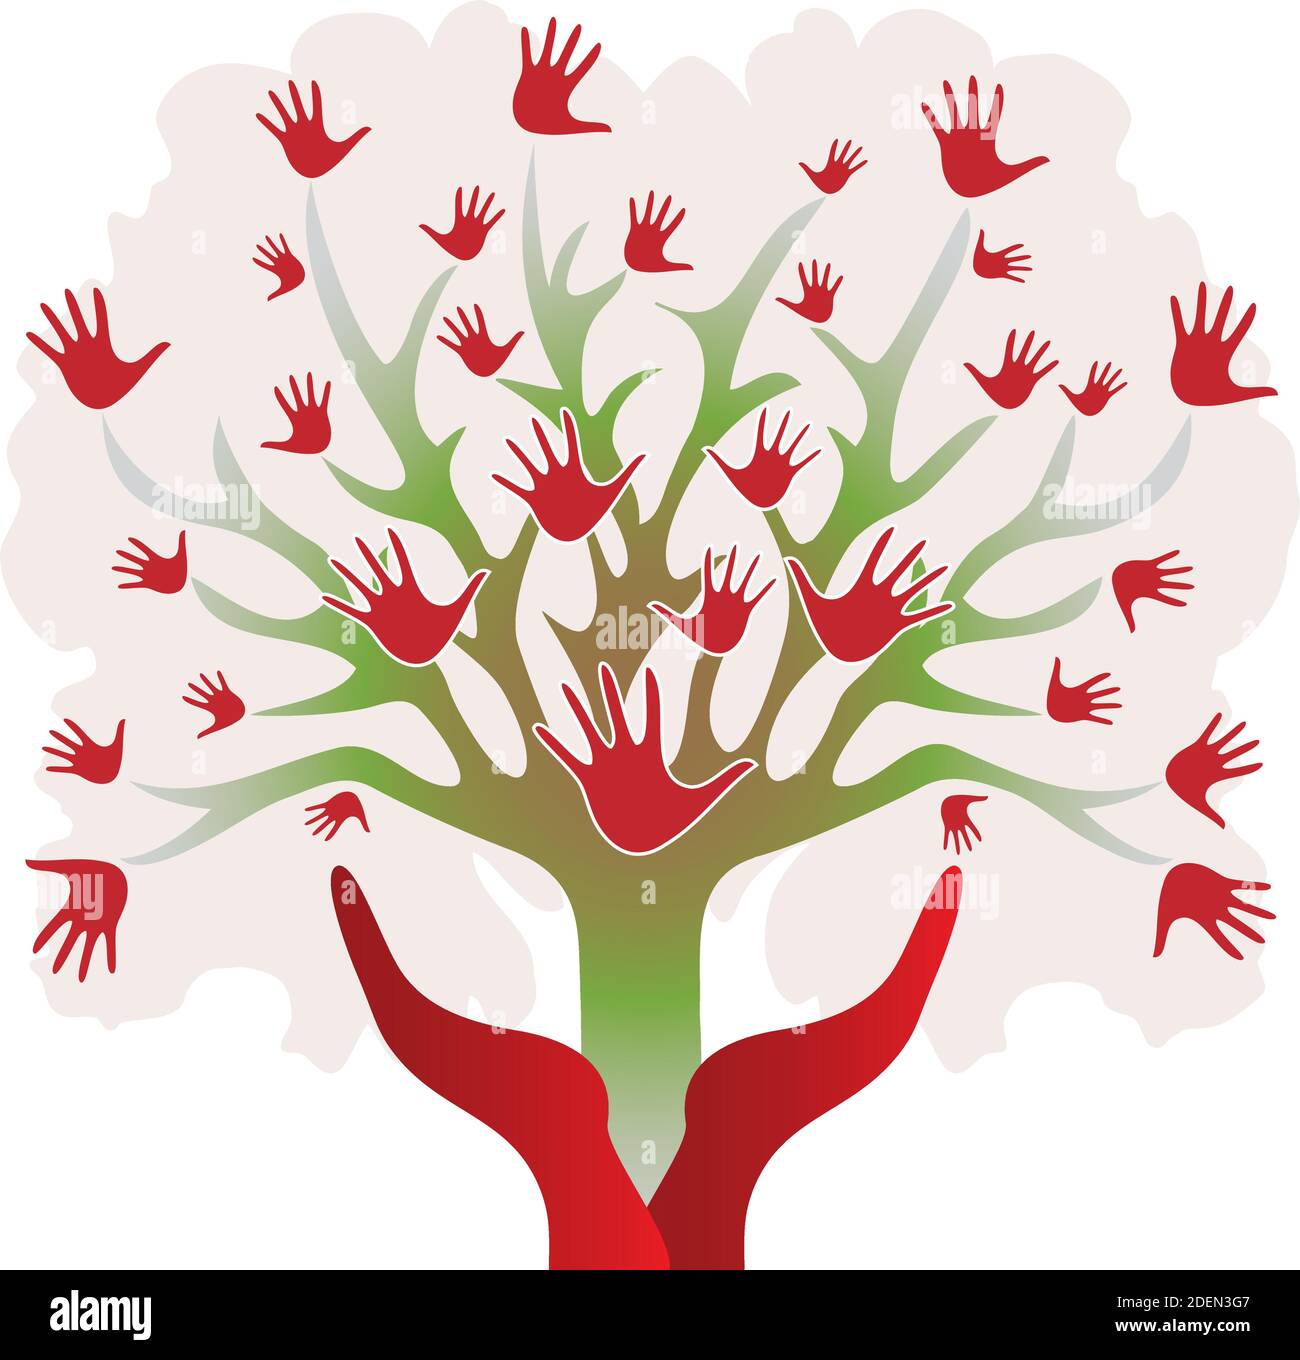 Tree with Hands in Green and Red Colors, Metaphor Solidarity Consciousness Compassion Community Stock Vector